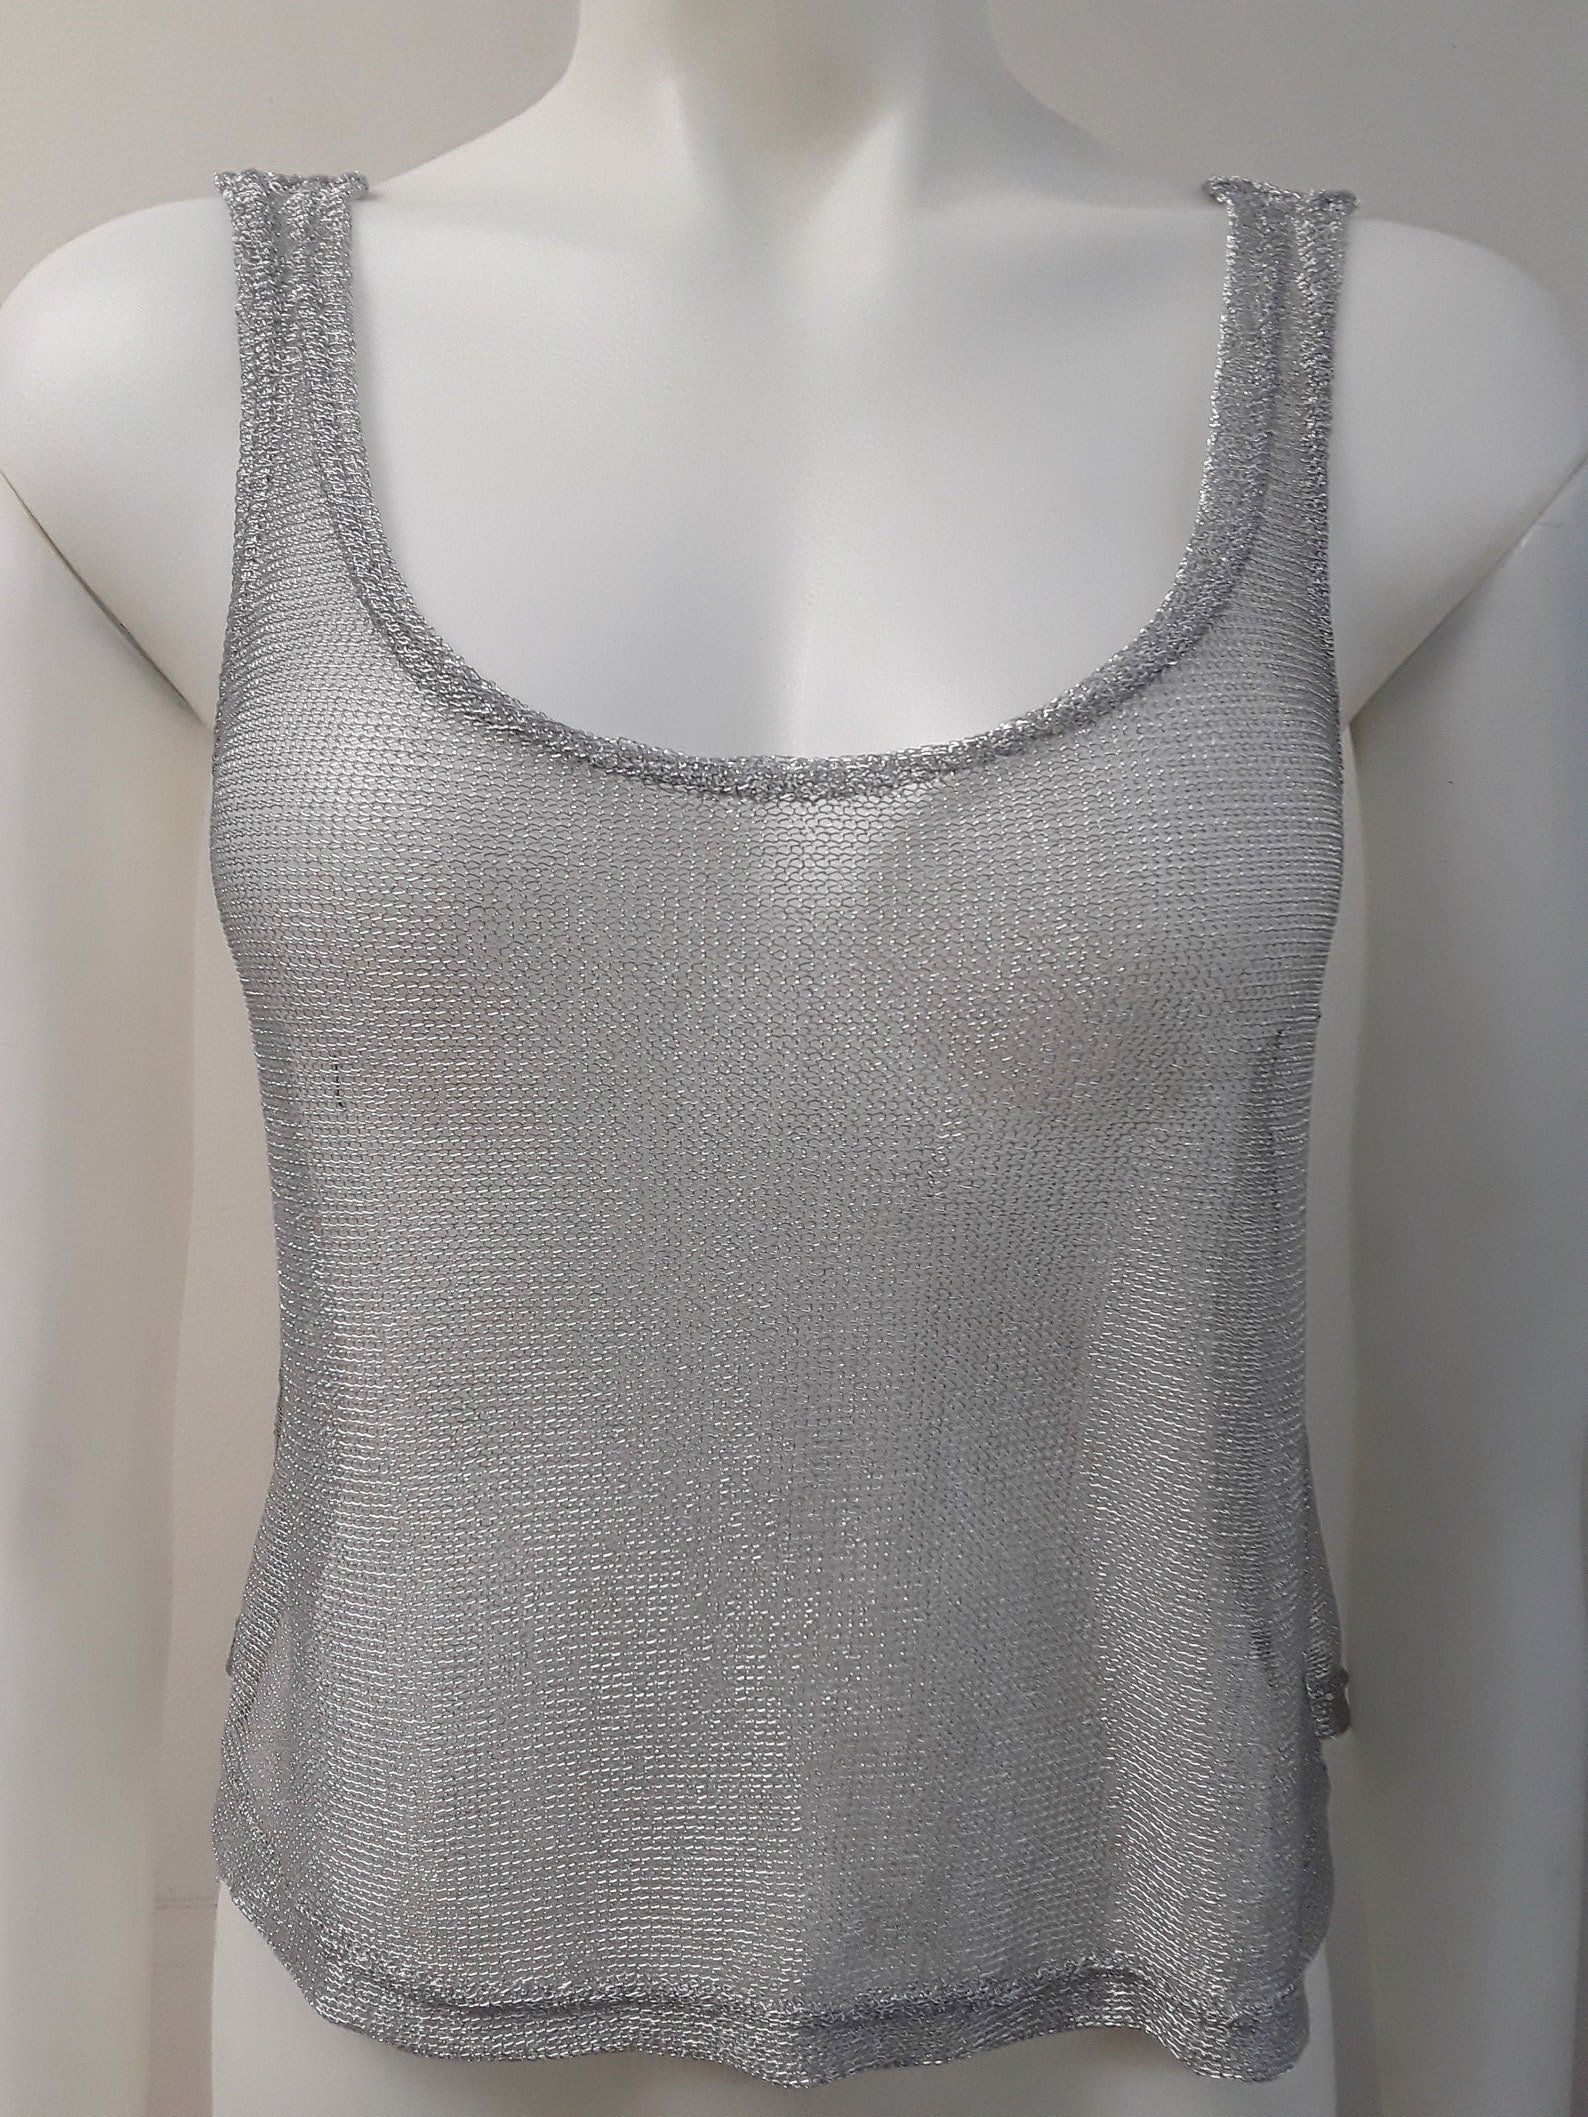 Chain Mail Tank Top | Etsy